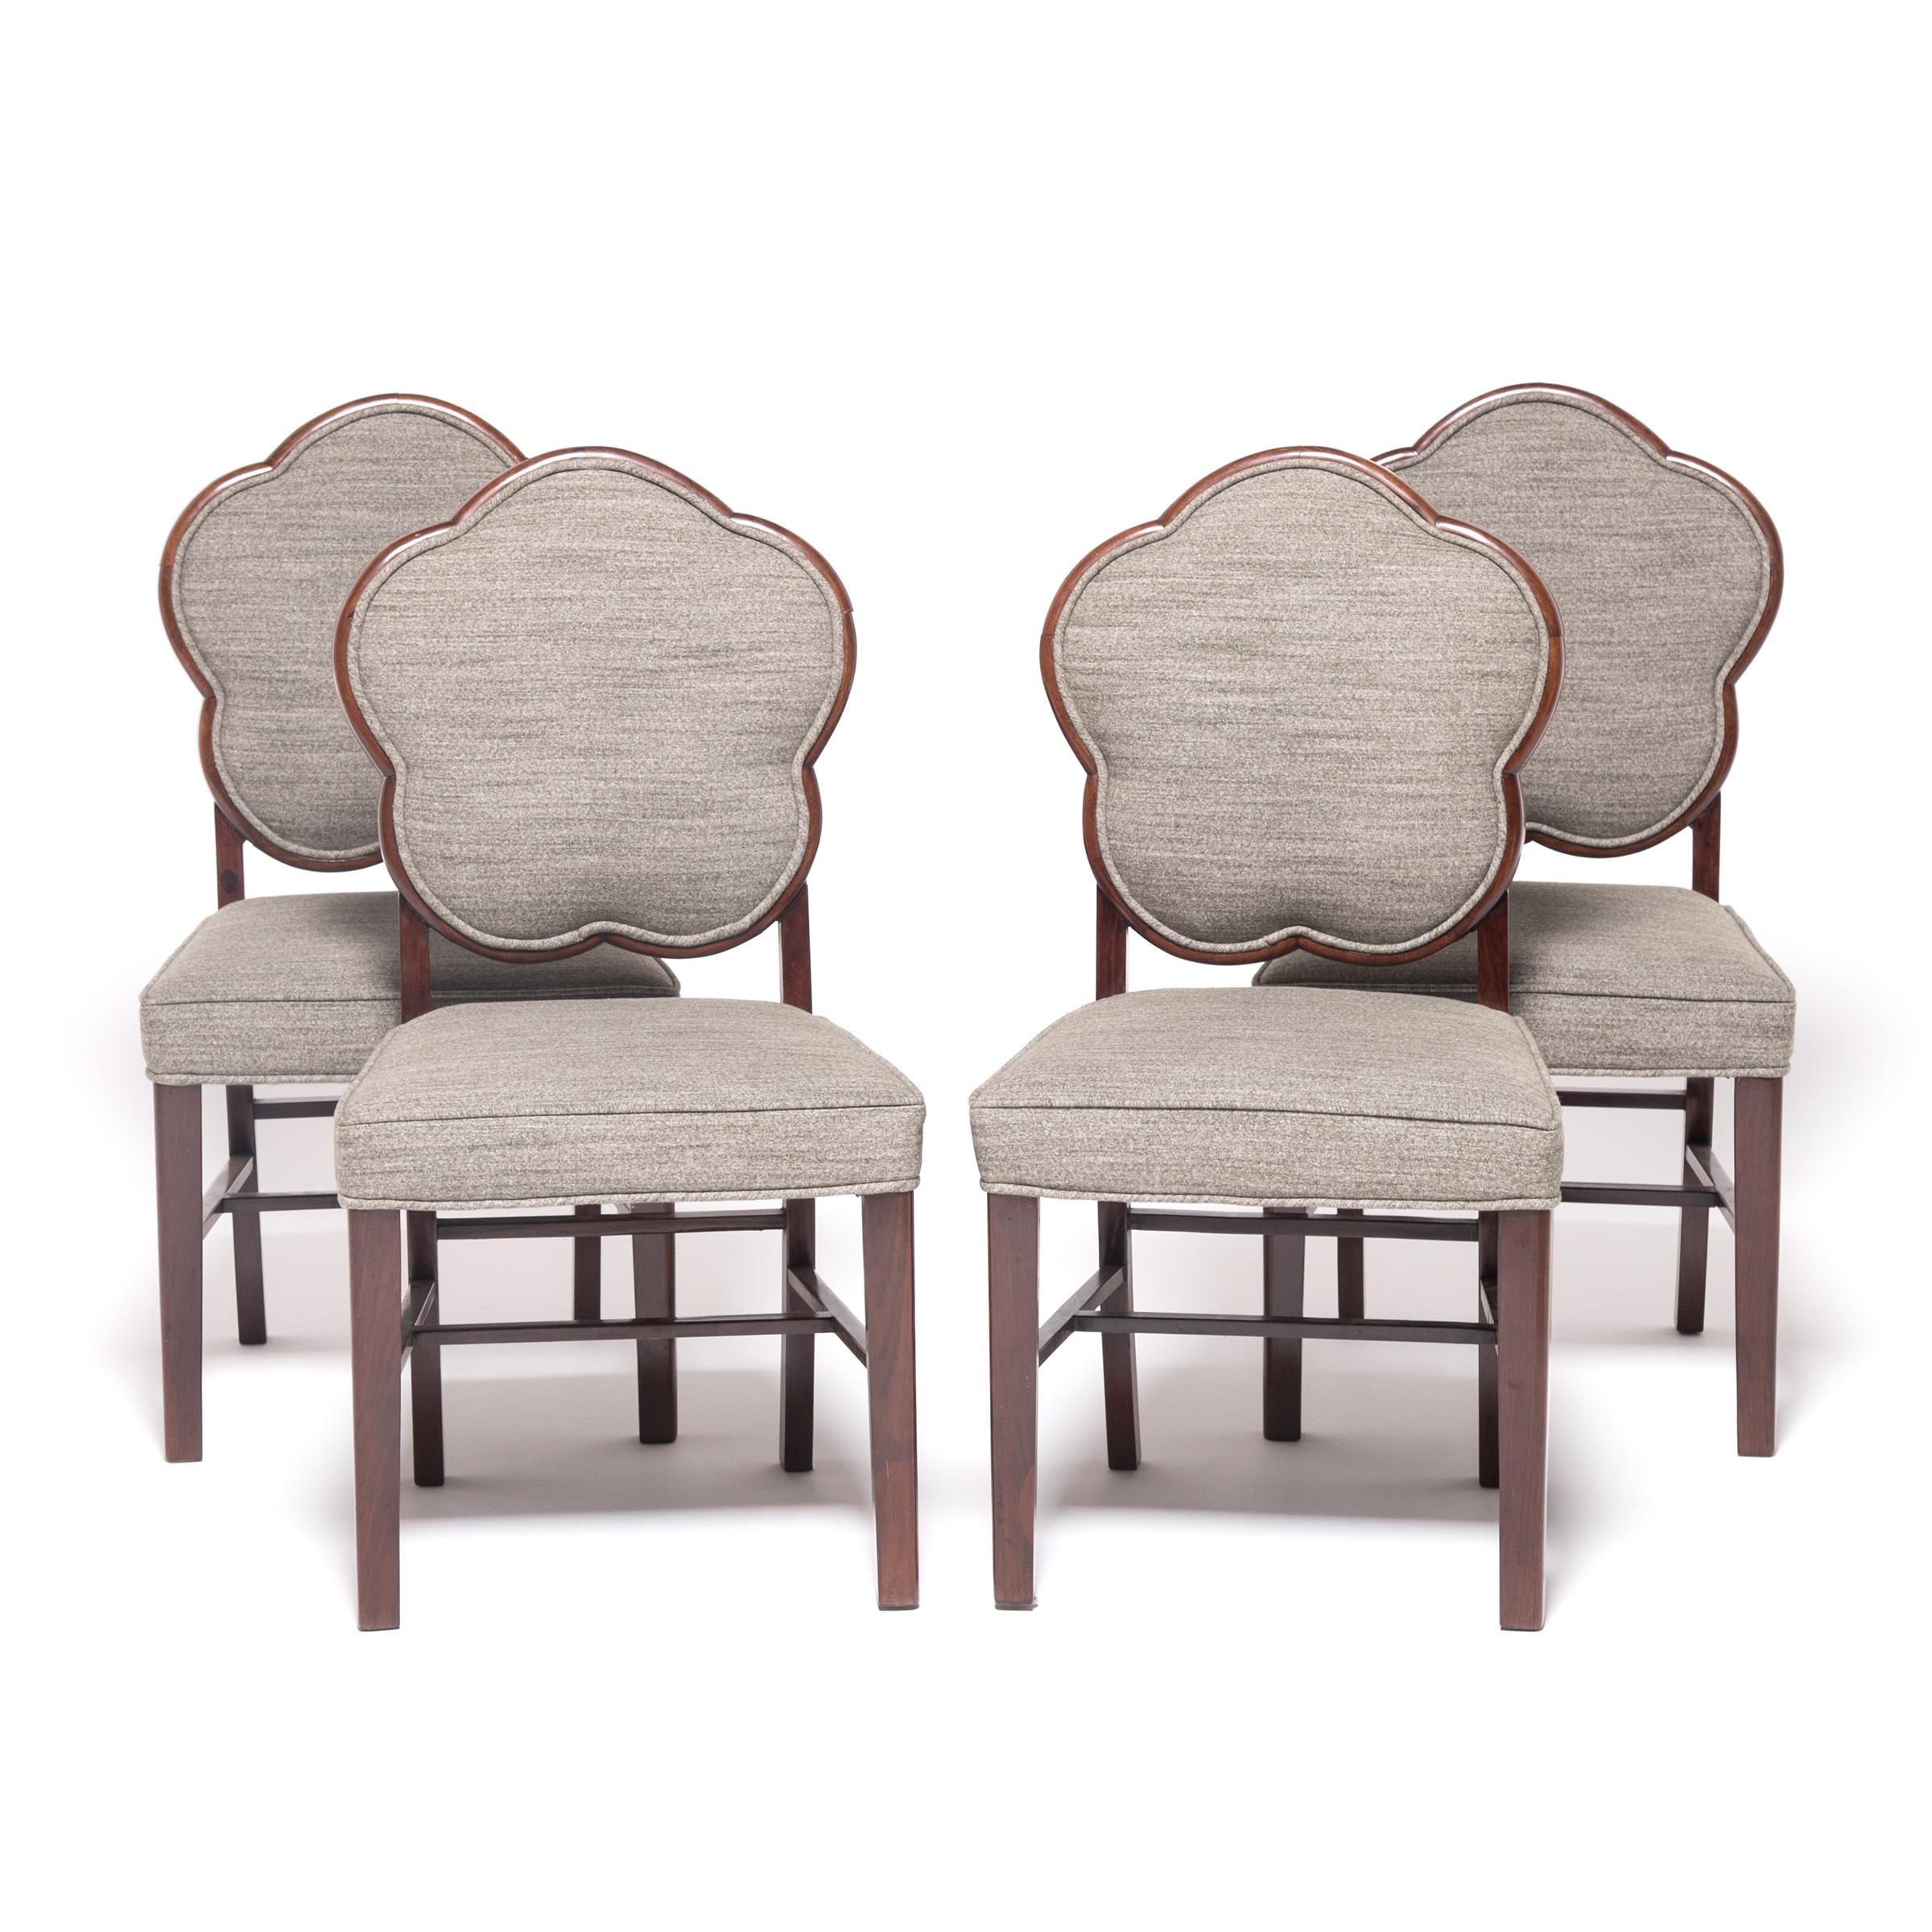 Made in the 1920s to satisfy the worldwide hunger for all things Art Deco, this collection of rosewood chairs from Shanghai combine the streamlined style of the era with hints of a Chinese aesthetic. The beautiful rosewood frames uphold tradition